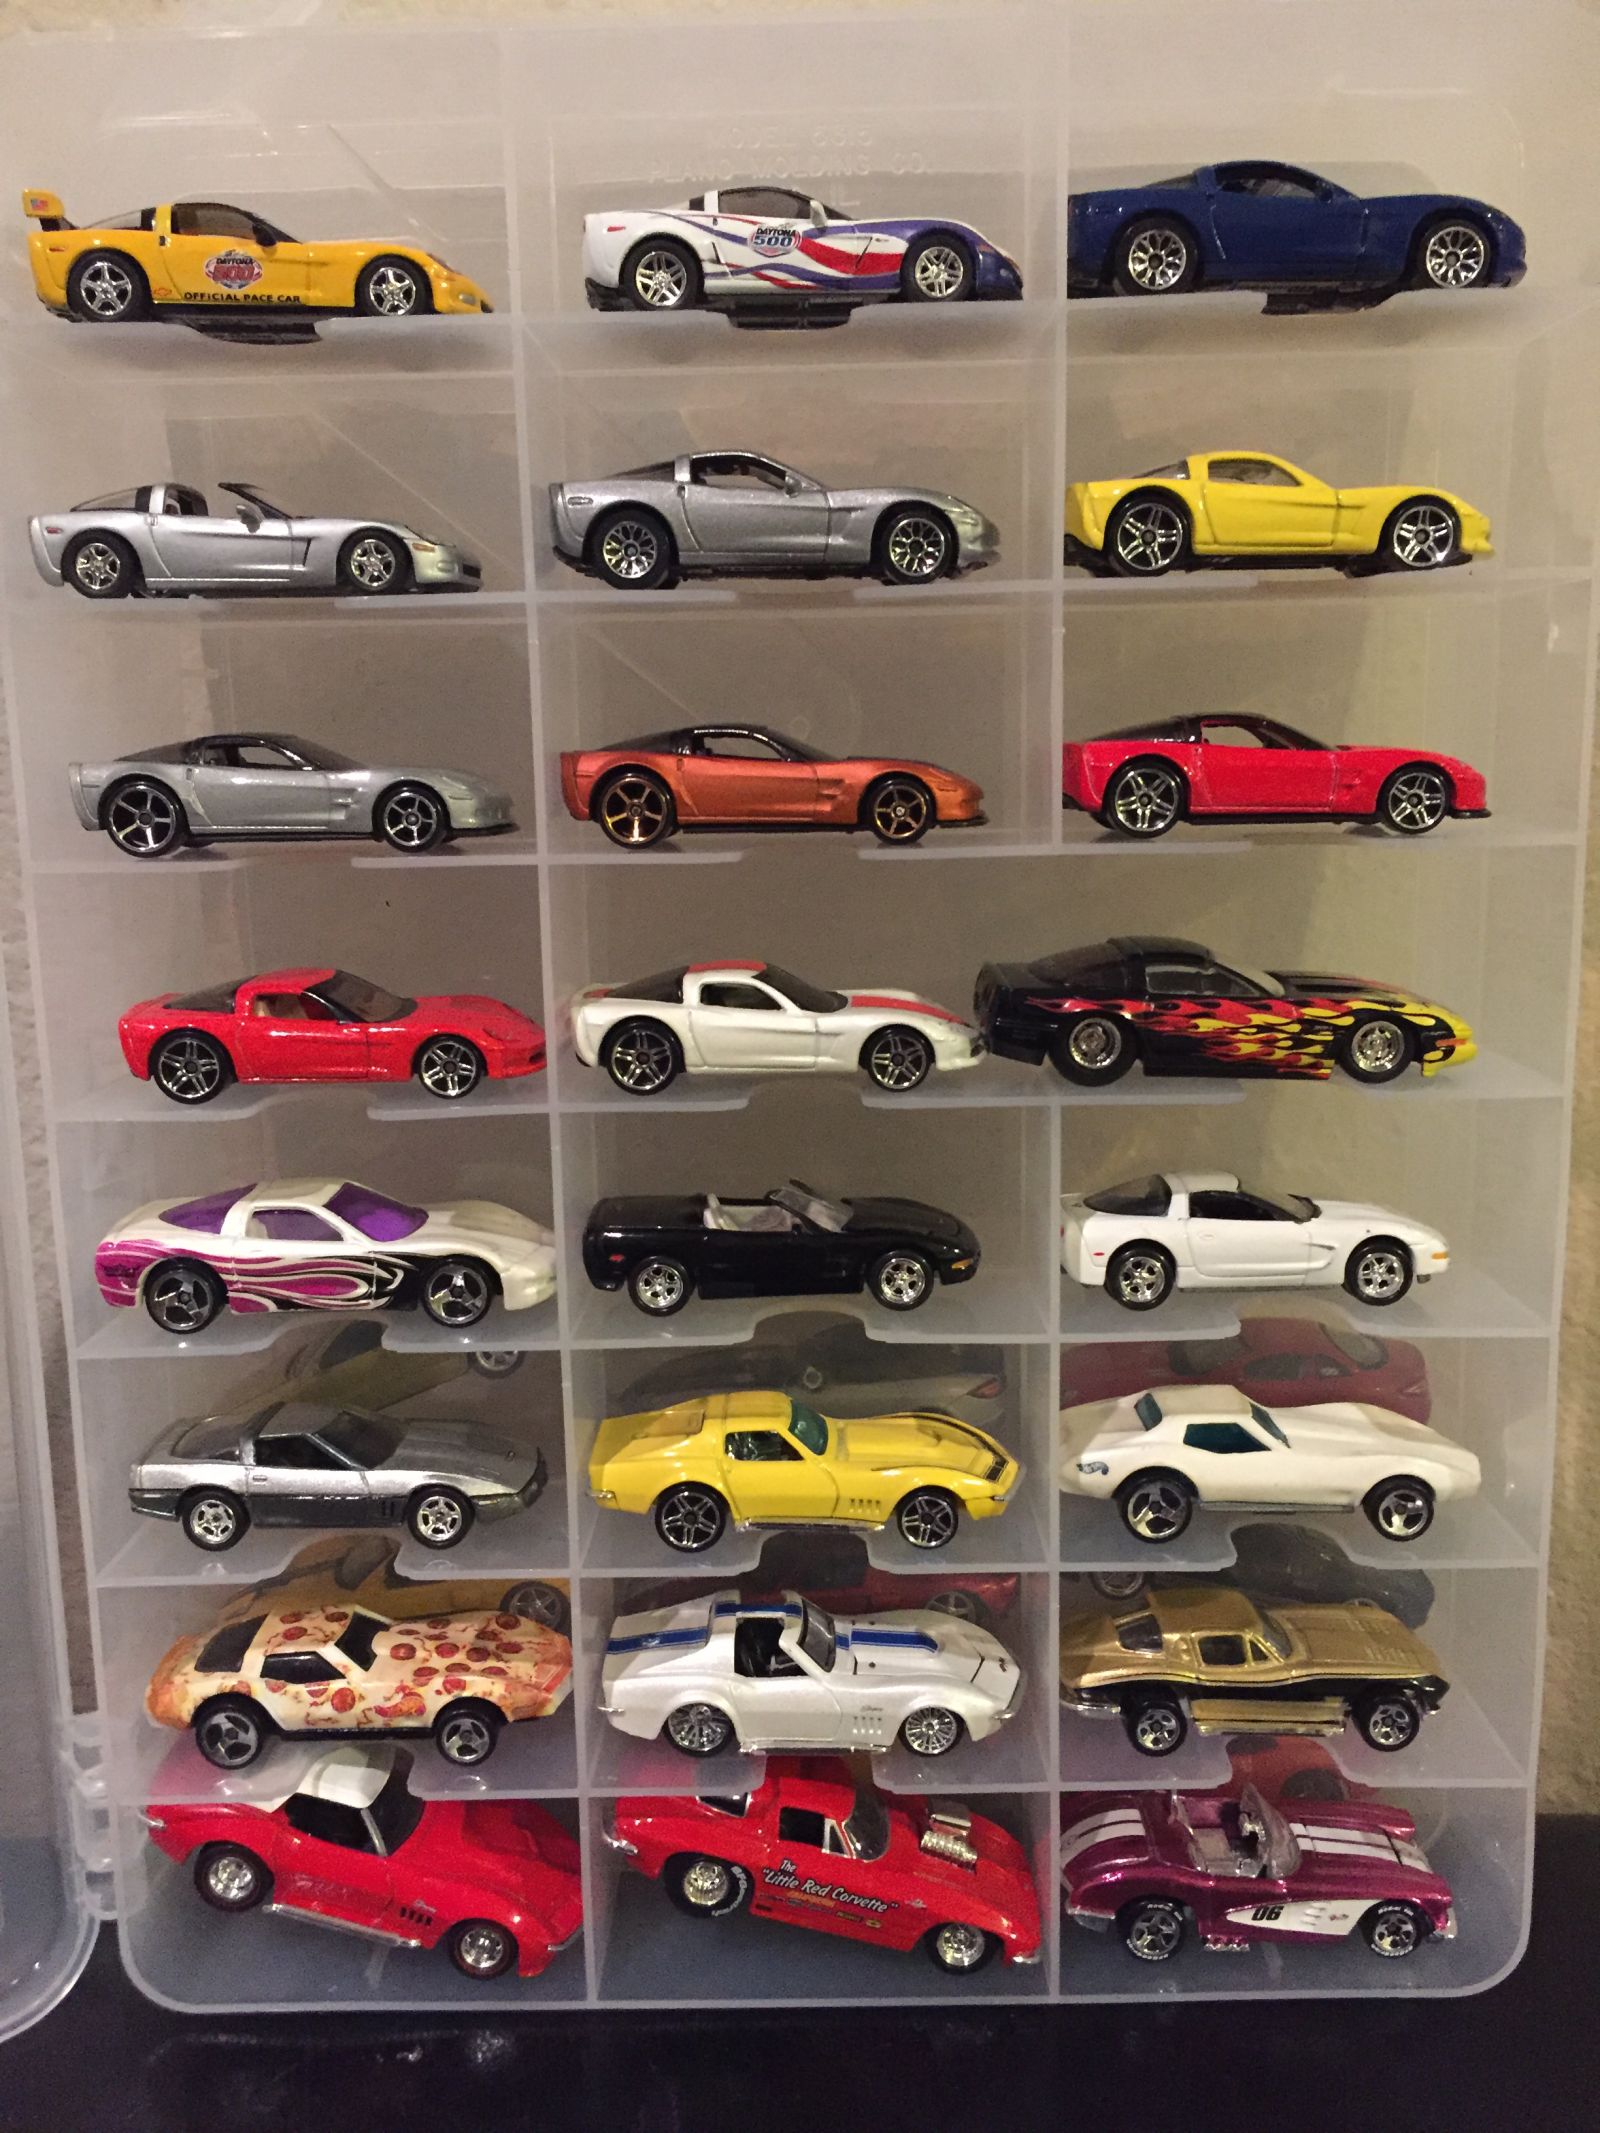 My younger brother was getting rid of his Corvette collection so I took it off his hands for him. 